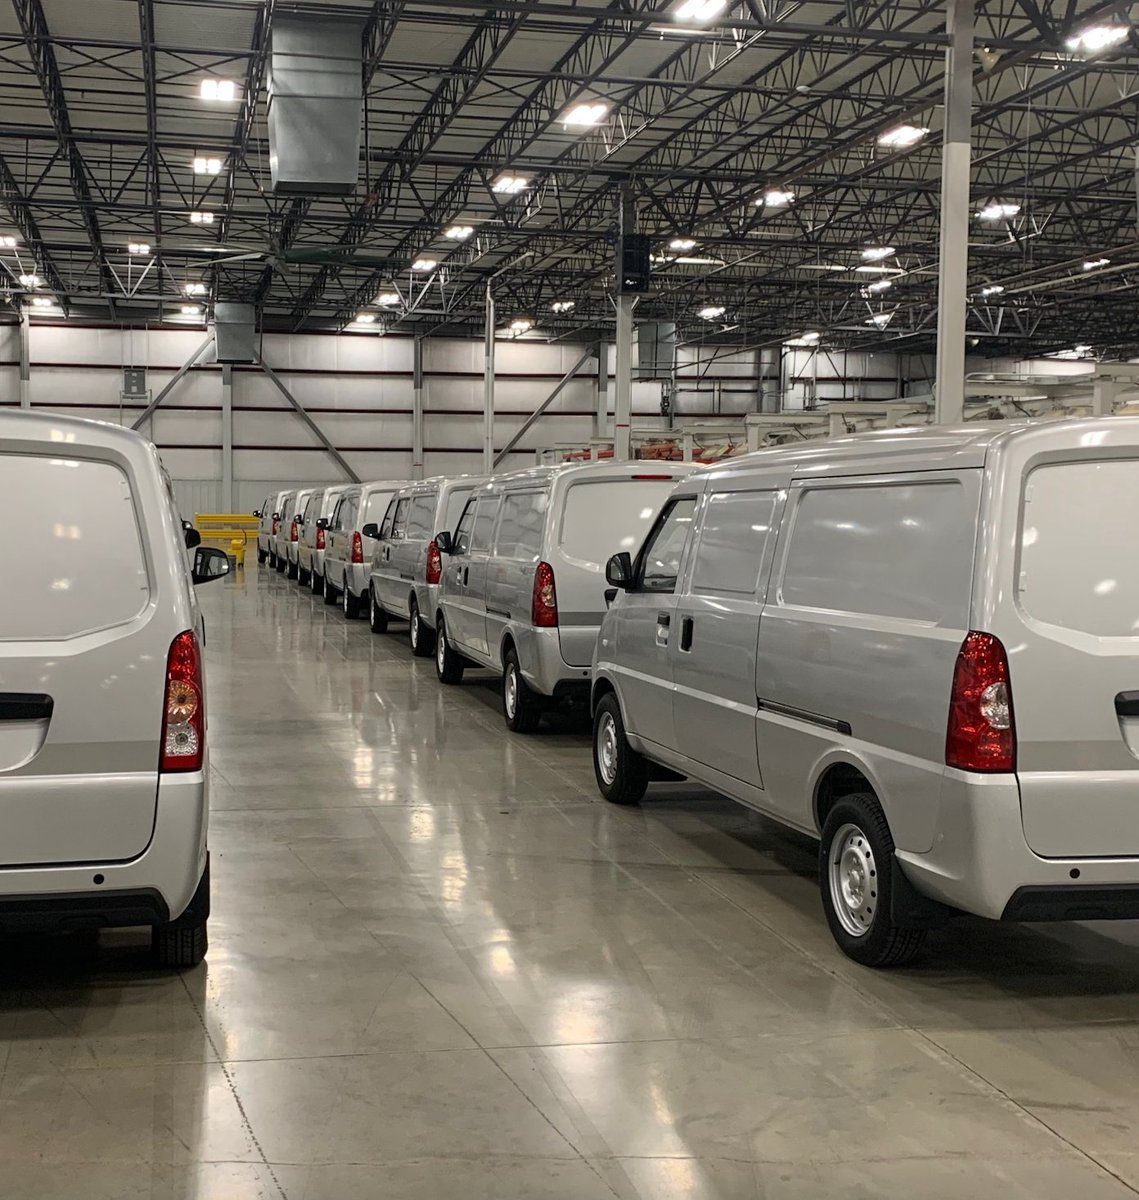 Mullen's Class 1 EV cargo vans at our AMEC facility in Tunica, MS⚡

$MULN #MullenAutomotive #MullenUSA #MullenCommercial #MullenONE #EVCargoVans #CommercialEV #ElectricFleet #ElectricVans #EV #ElectricVehicles #GreenTechnology #DriveElectric #Sustainability